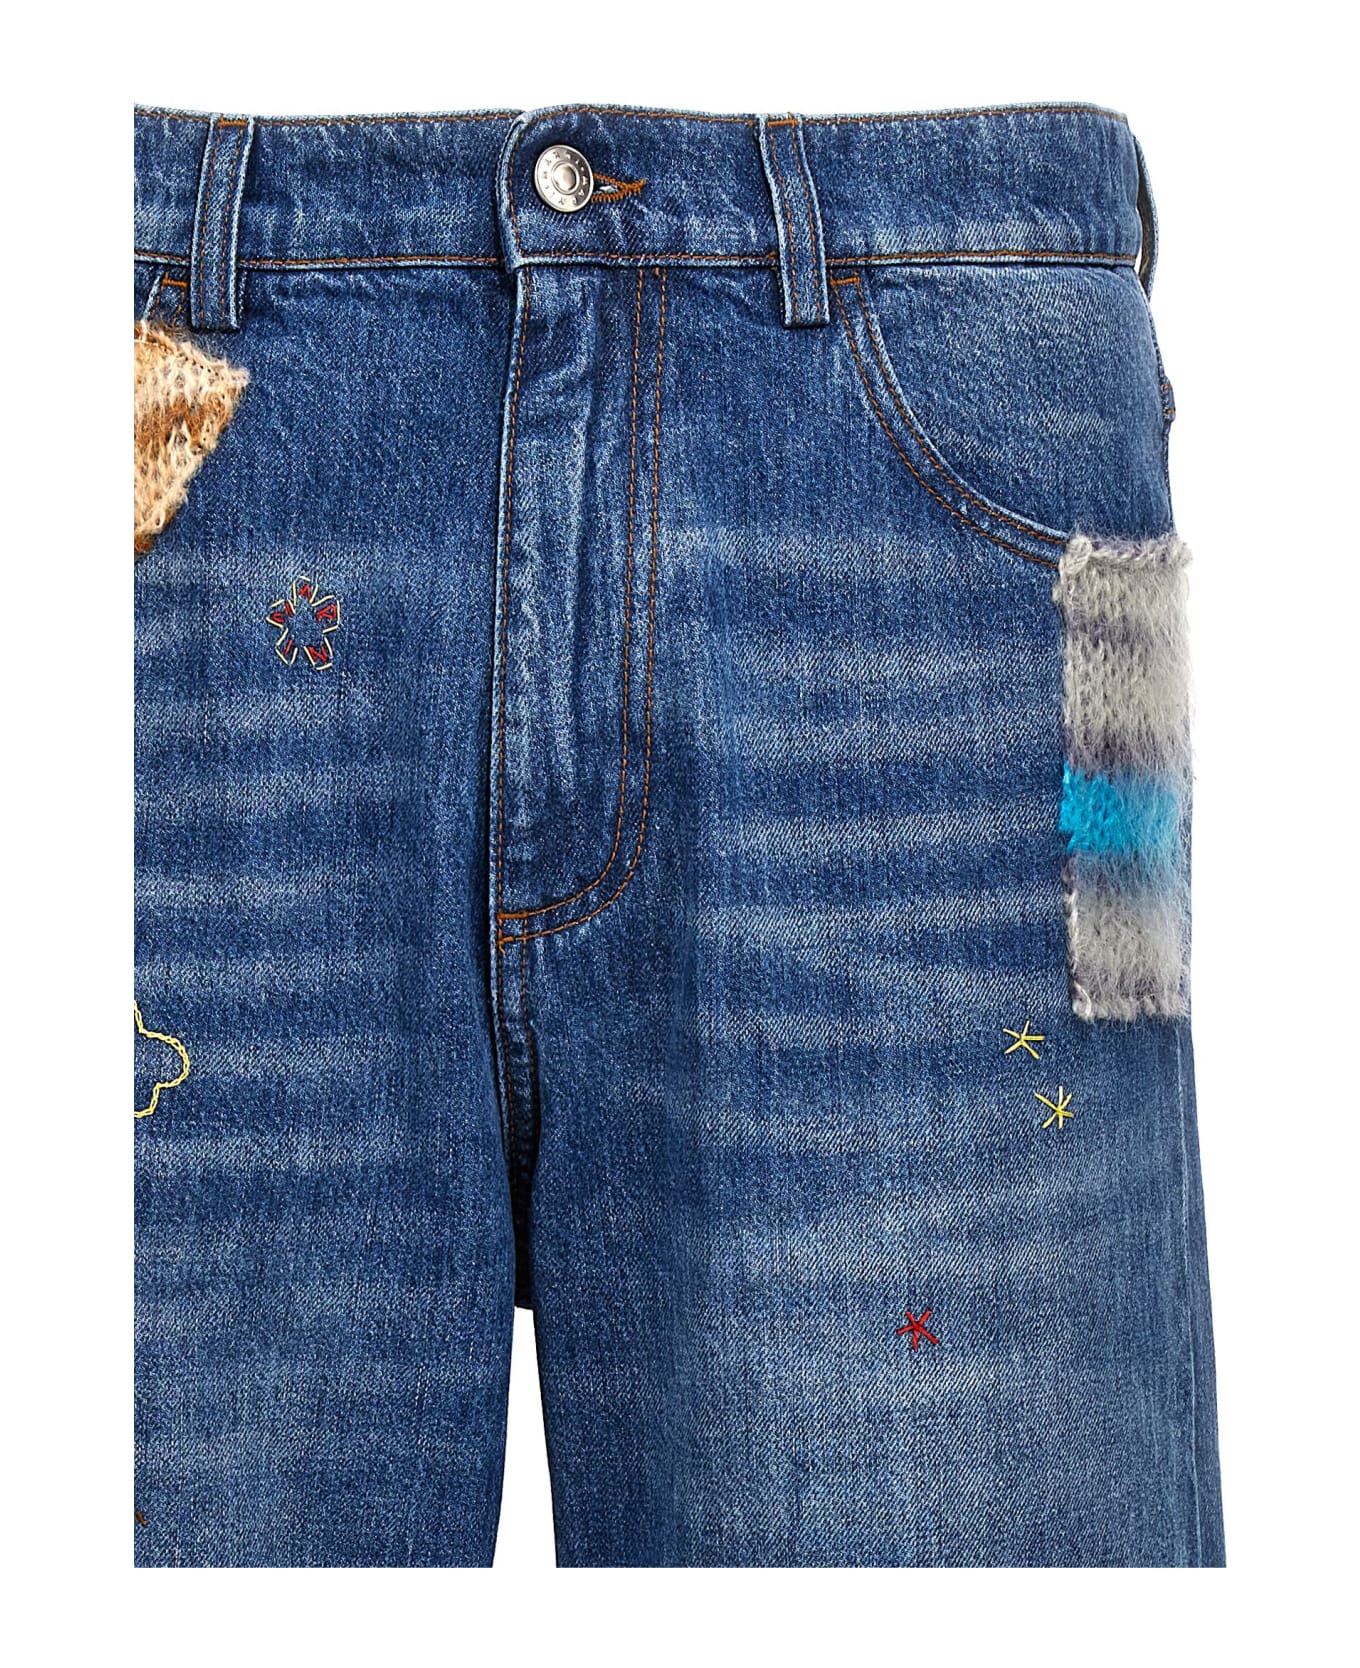 Marni Embroidery Jeans And Patches - Blue